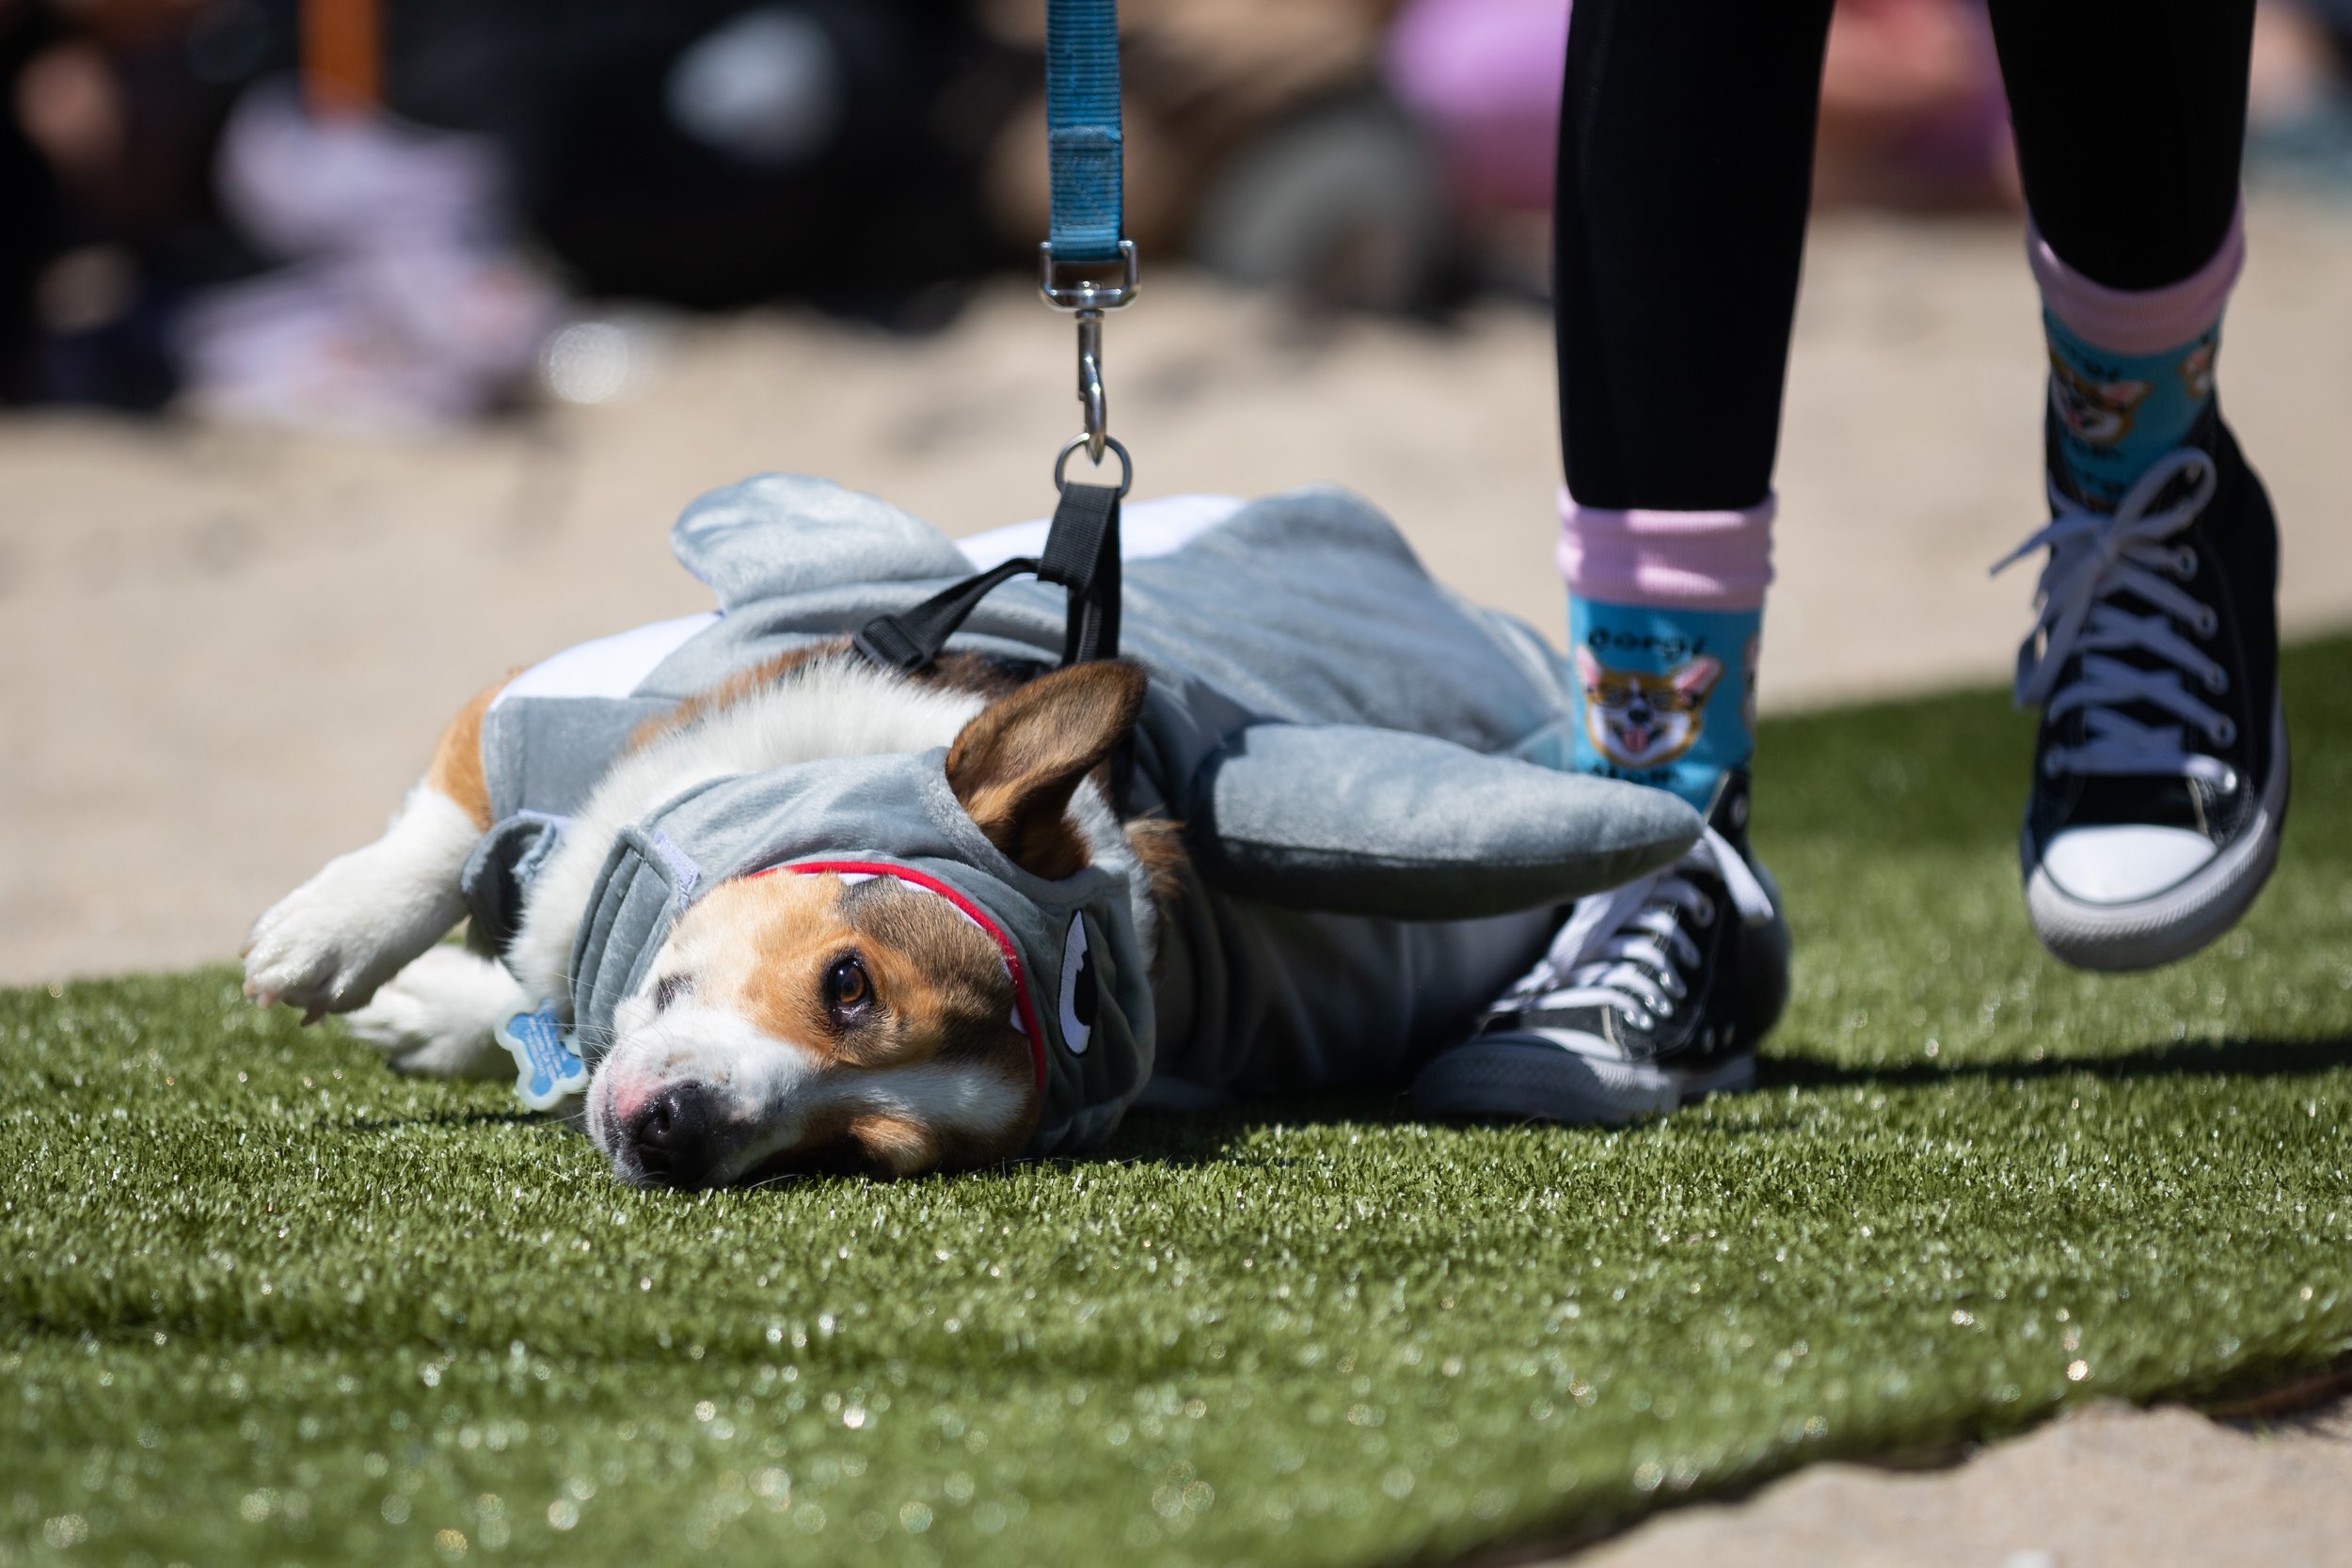  Milo, dressed in a shark costume for the anything goes part of the Best Corgi Costume Contest, rolls on turf during Corgi Beach Day at Huntington Dog Beach, Huntington Beach, Calif., on Saturday, April 1, 2023. There were over a thousand people in a